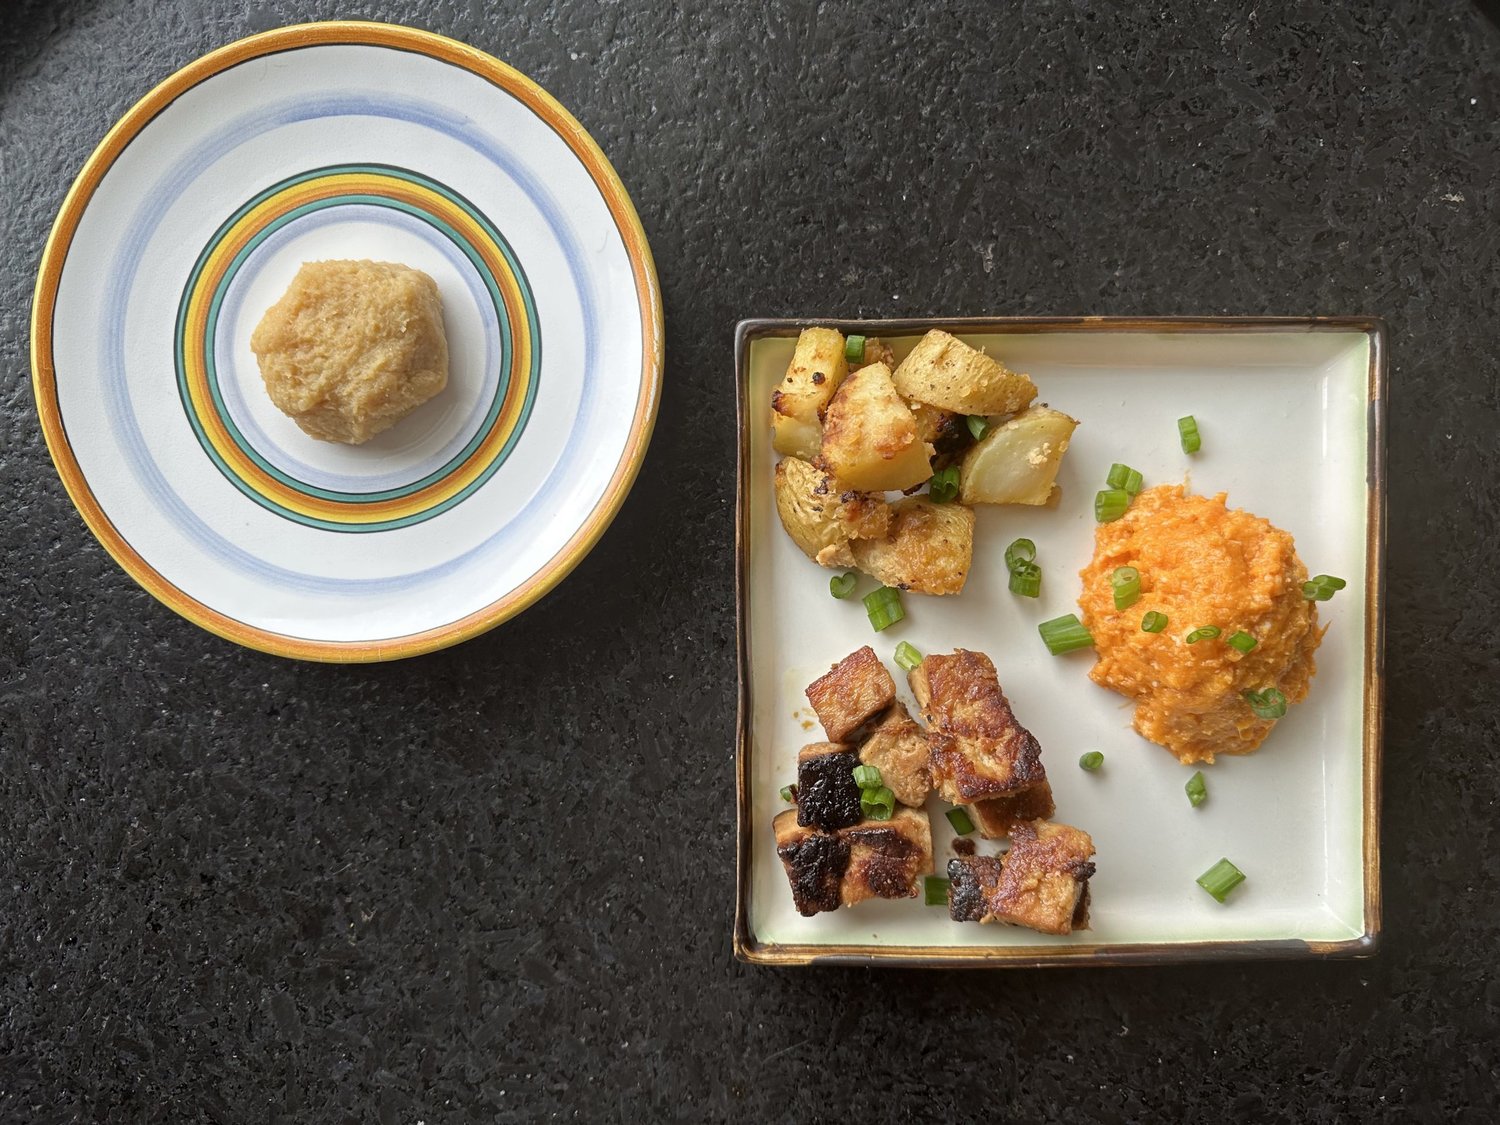 A trio of white miso dishes: fried tofu with ginger and garlic, miso butter-baked potatoes and mashed sweet potatoes with miso butter. On the round plate is a dollop of white miso.